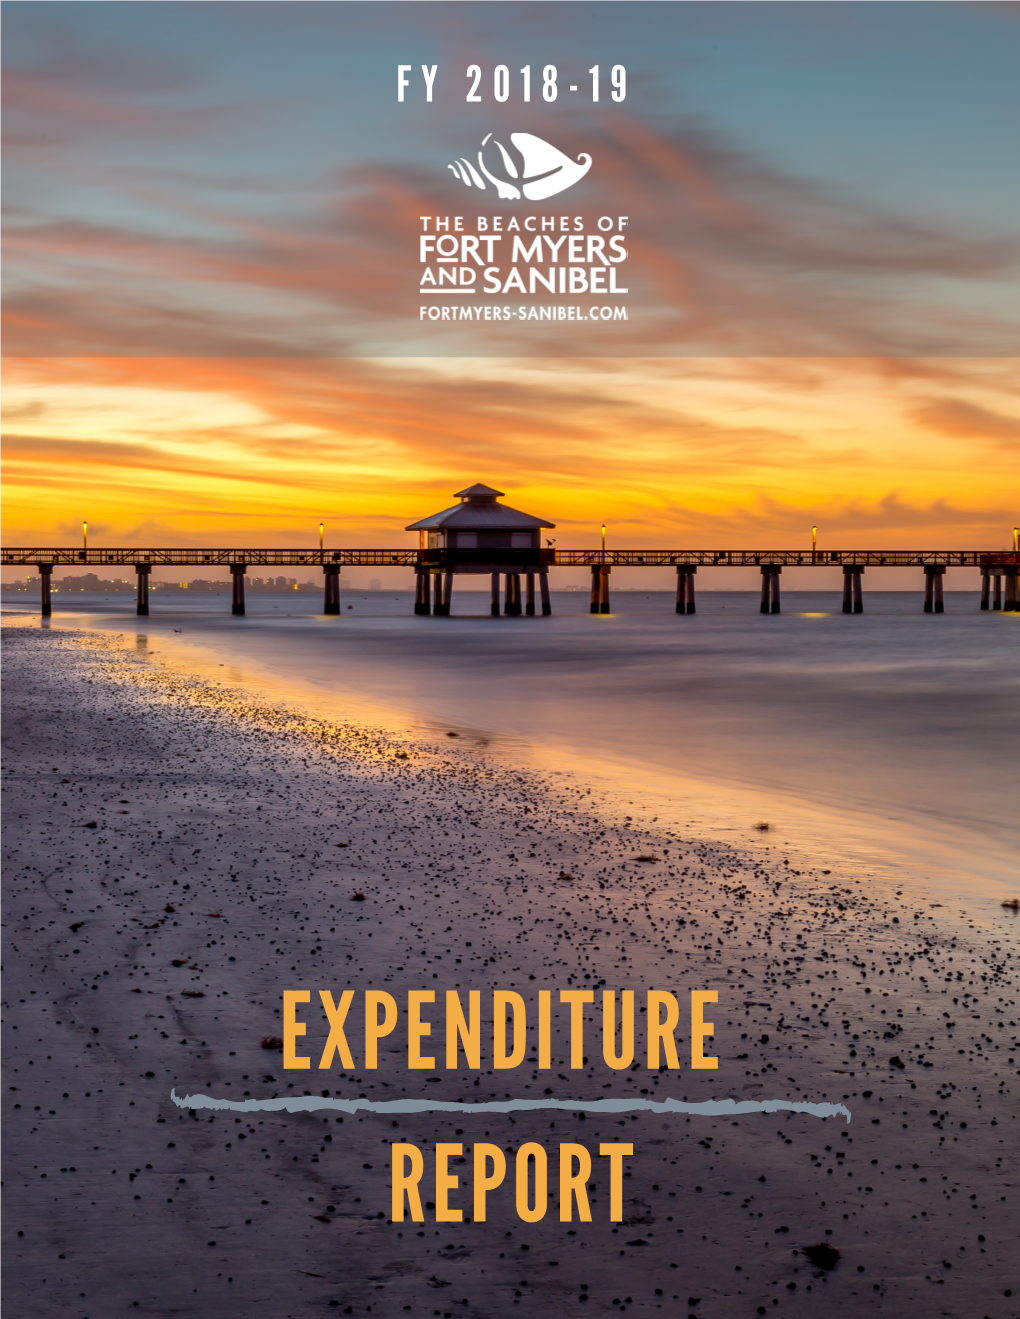 FY 2018-19 VCB Expenditure Report